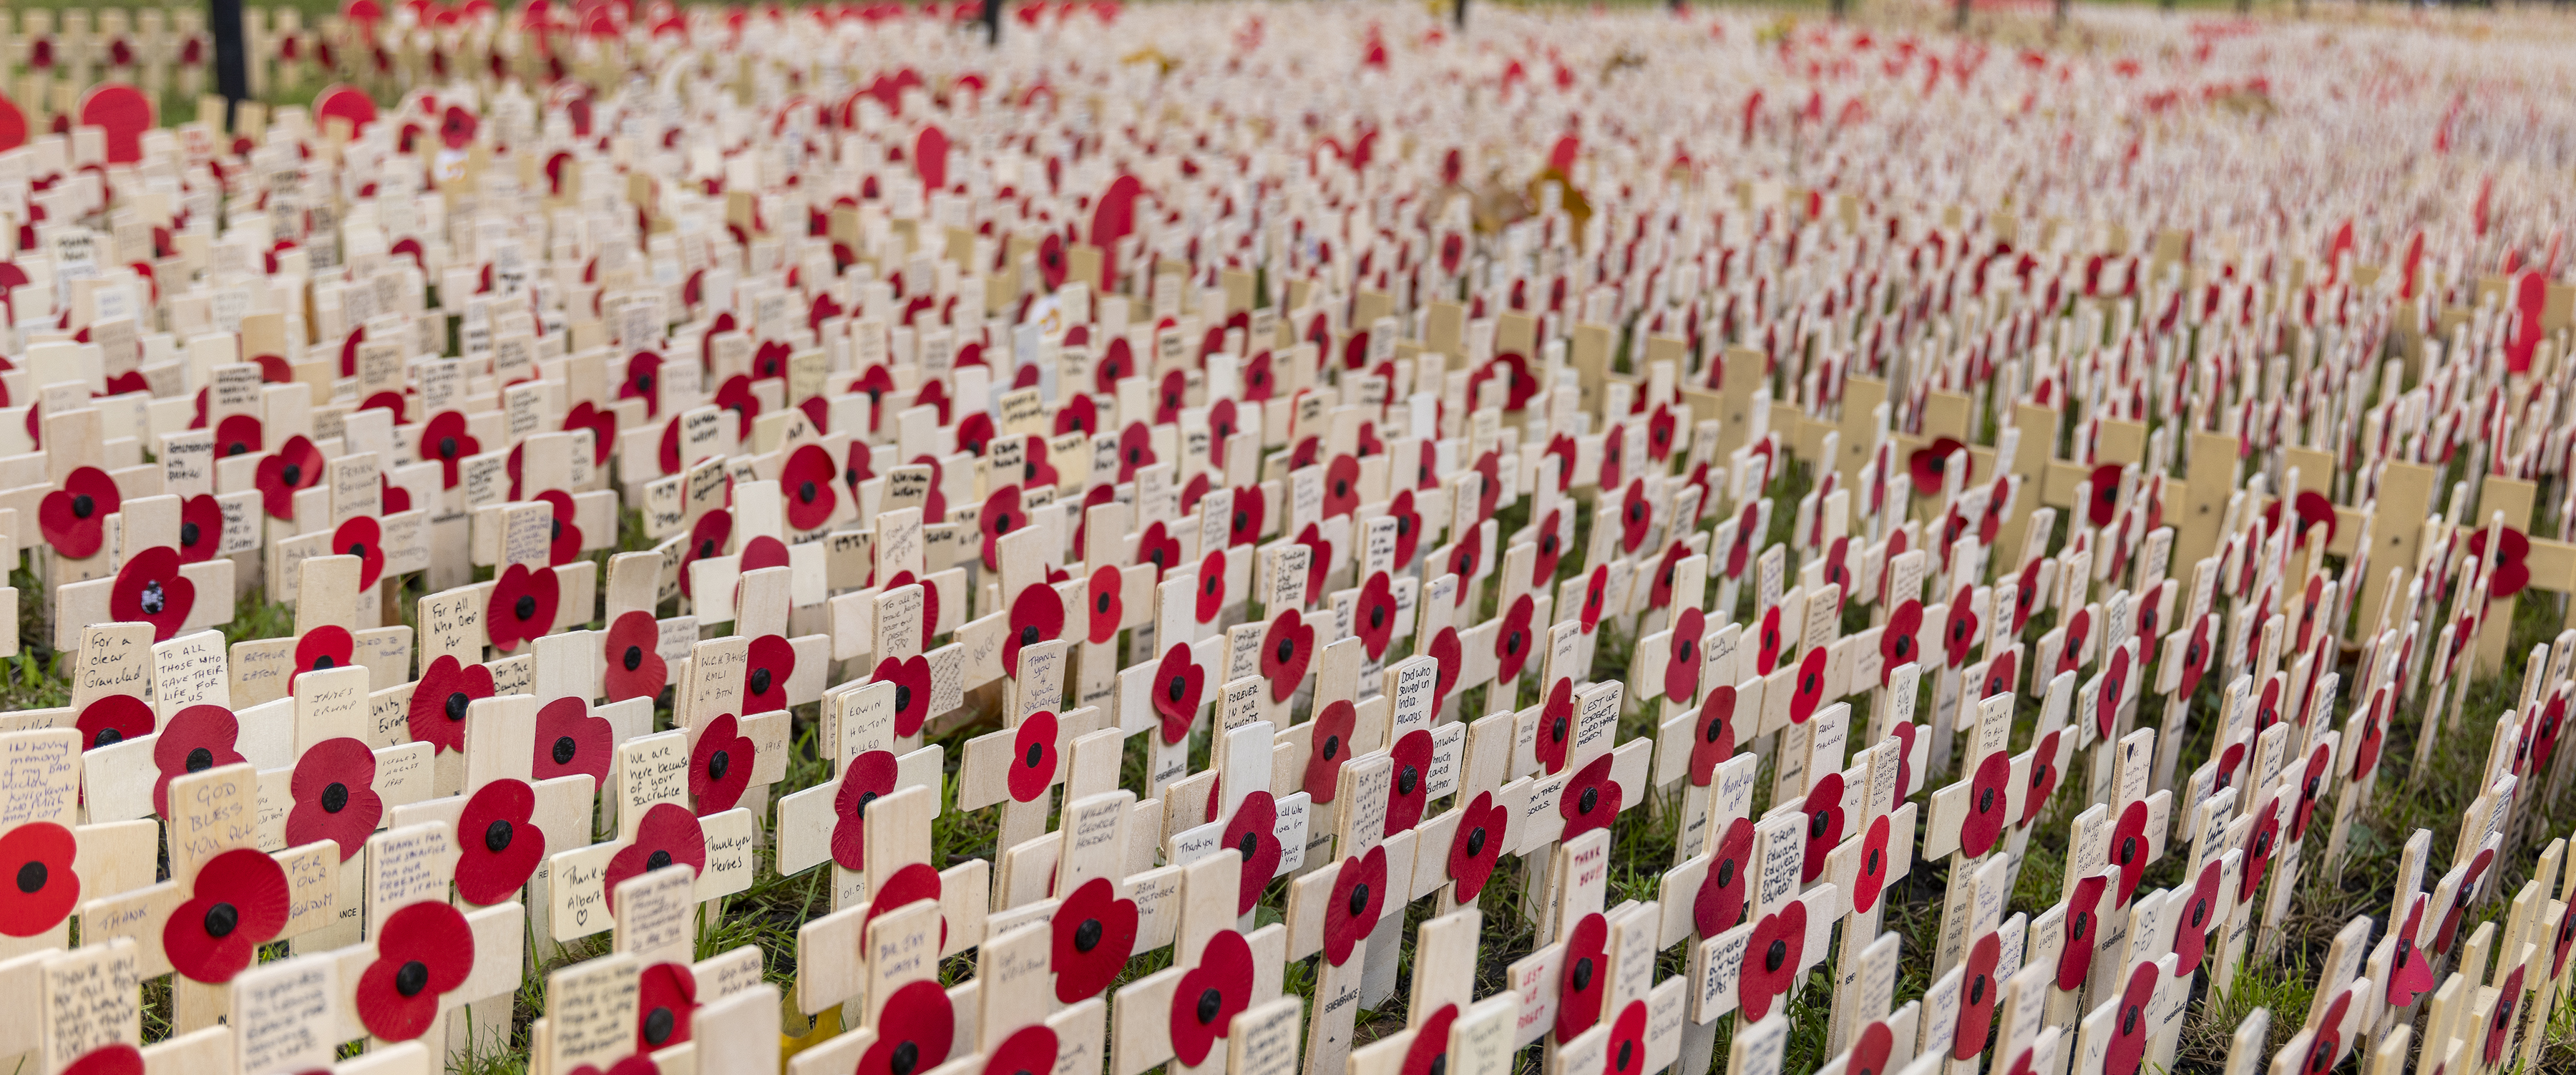 Hundreds of Poppy's and messages on Remembrance crosses in the ground. 